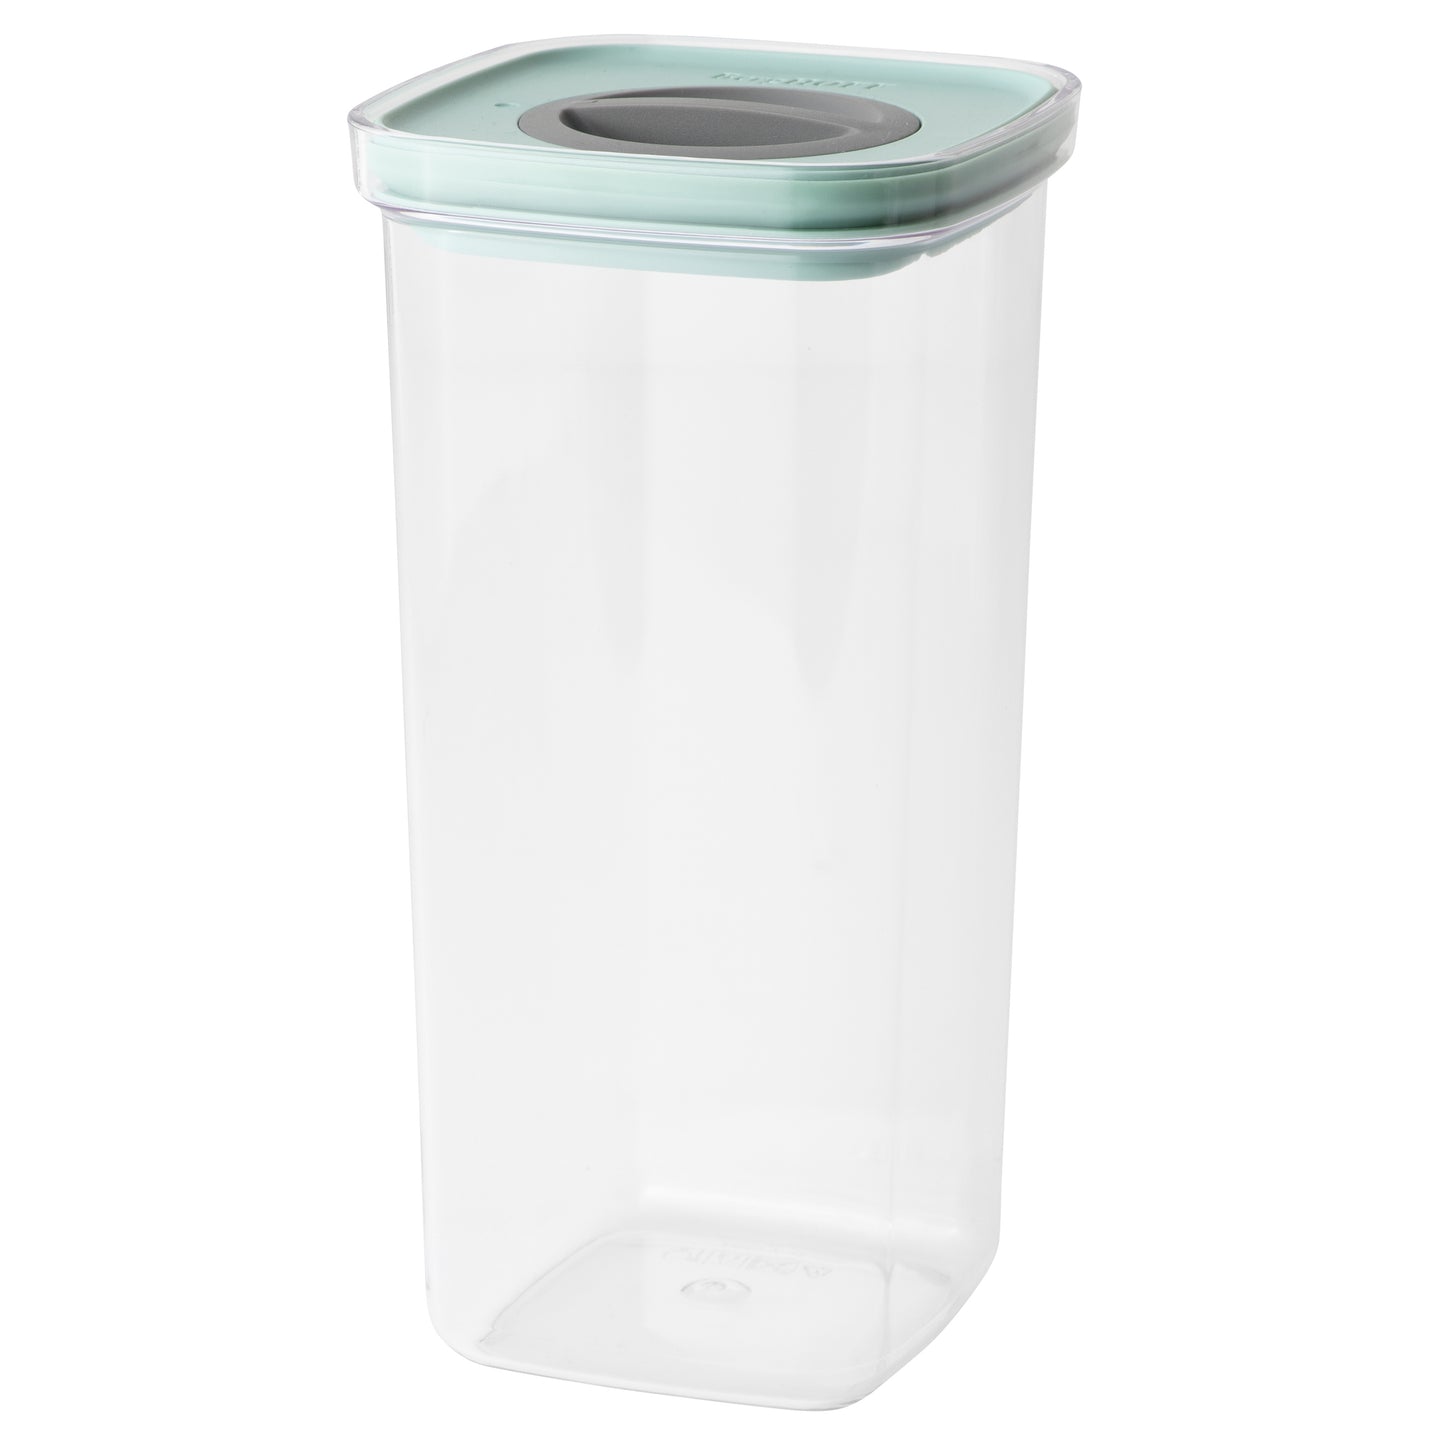 BergHOFF Leo Smart Seal Food Container, Green